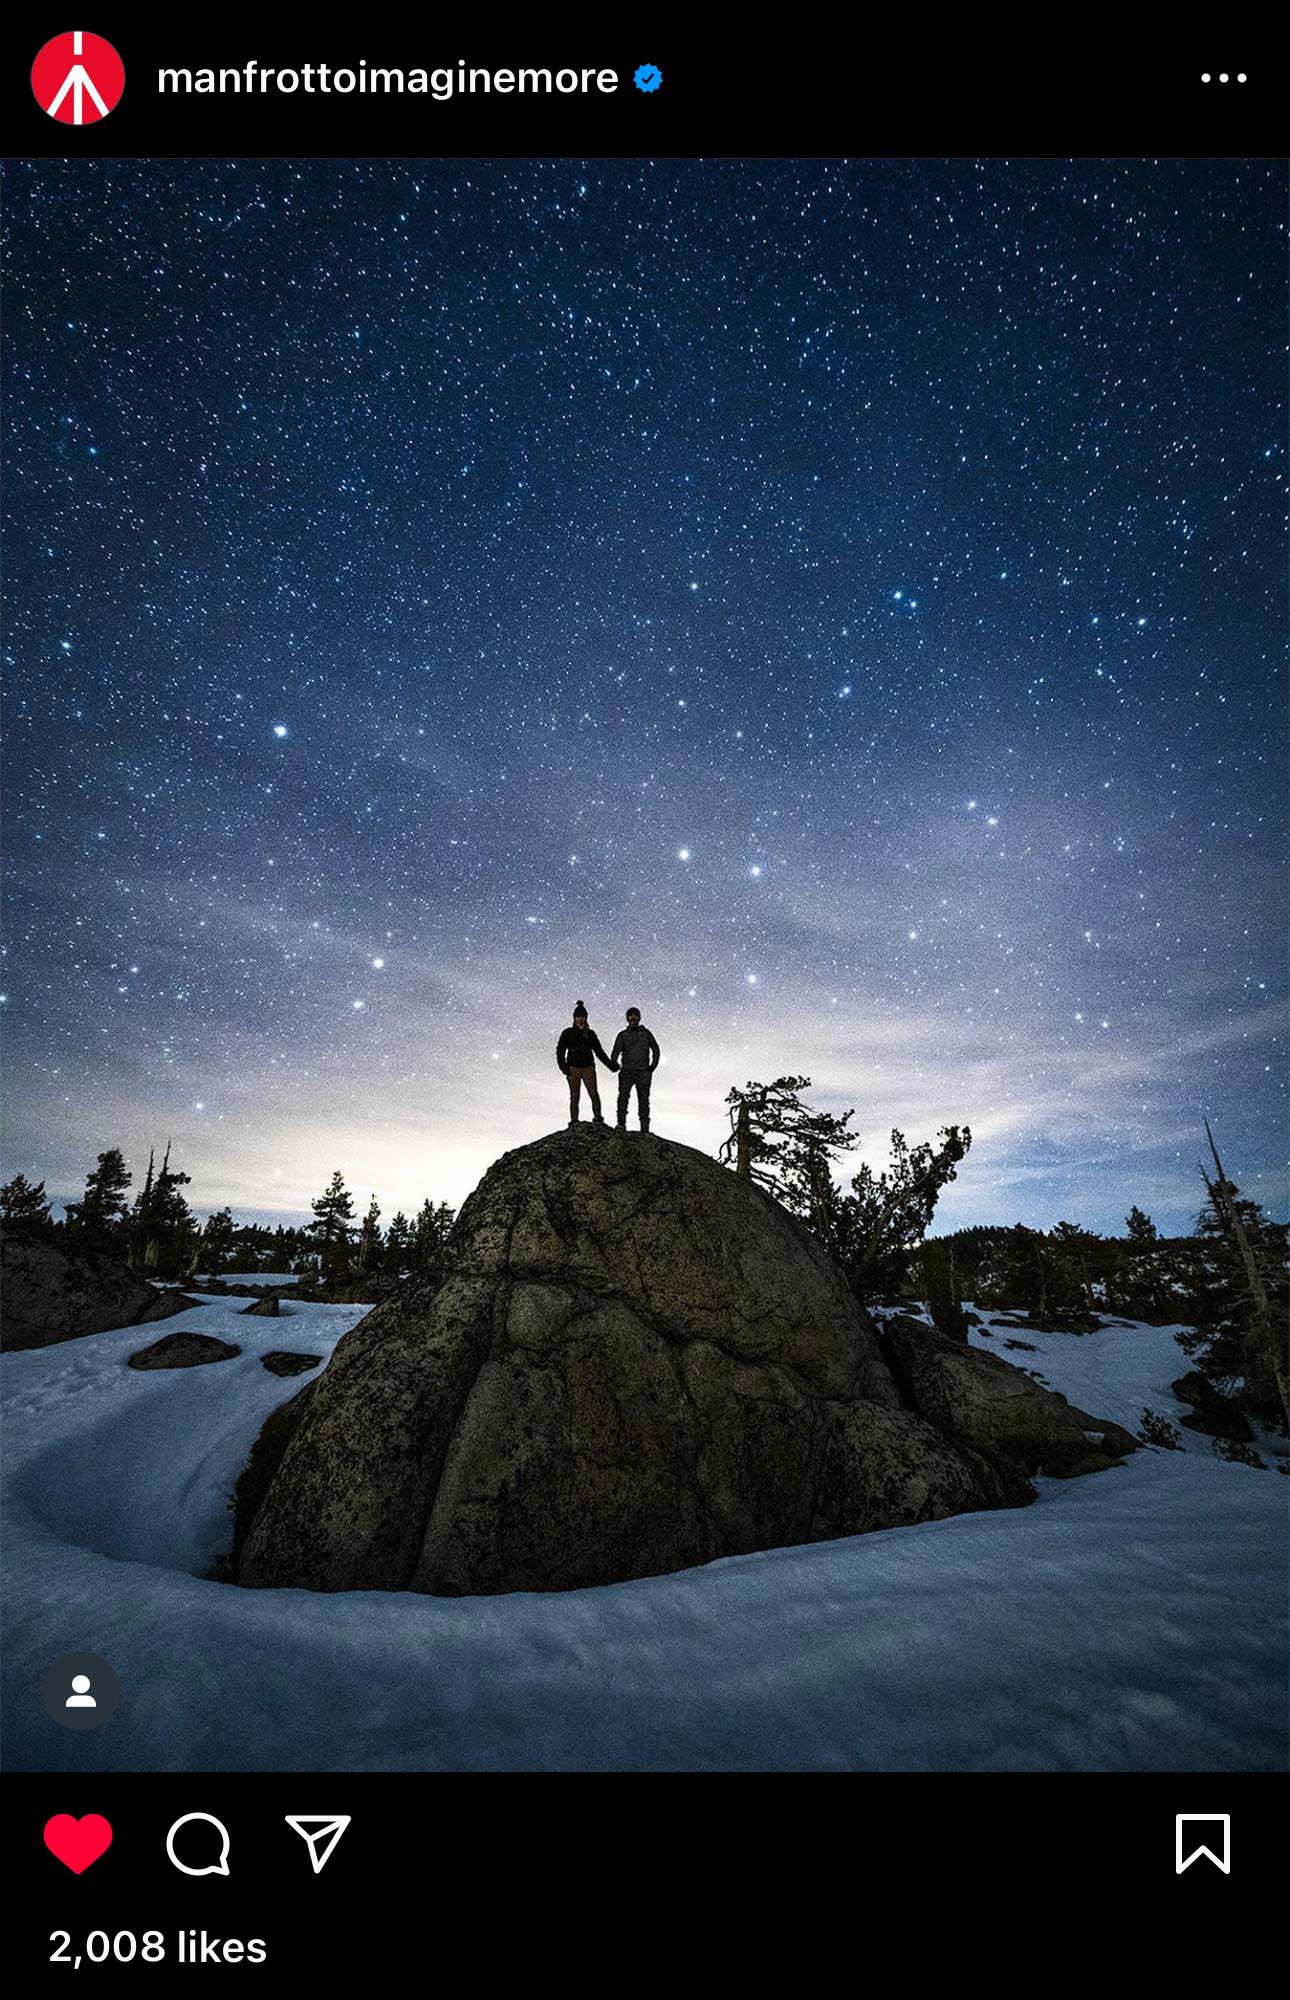 Holding hands under the winter night sky for Manfrotto on Instagram.